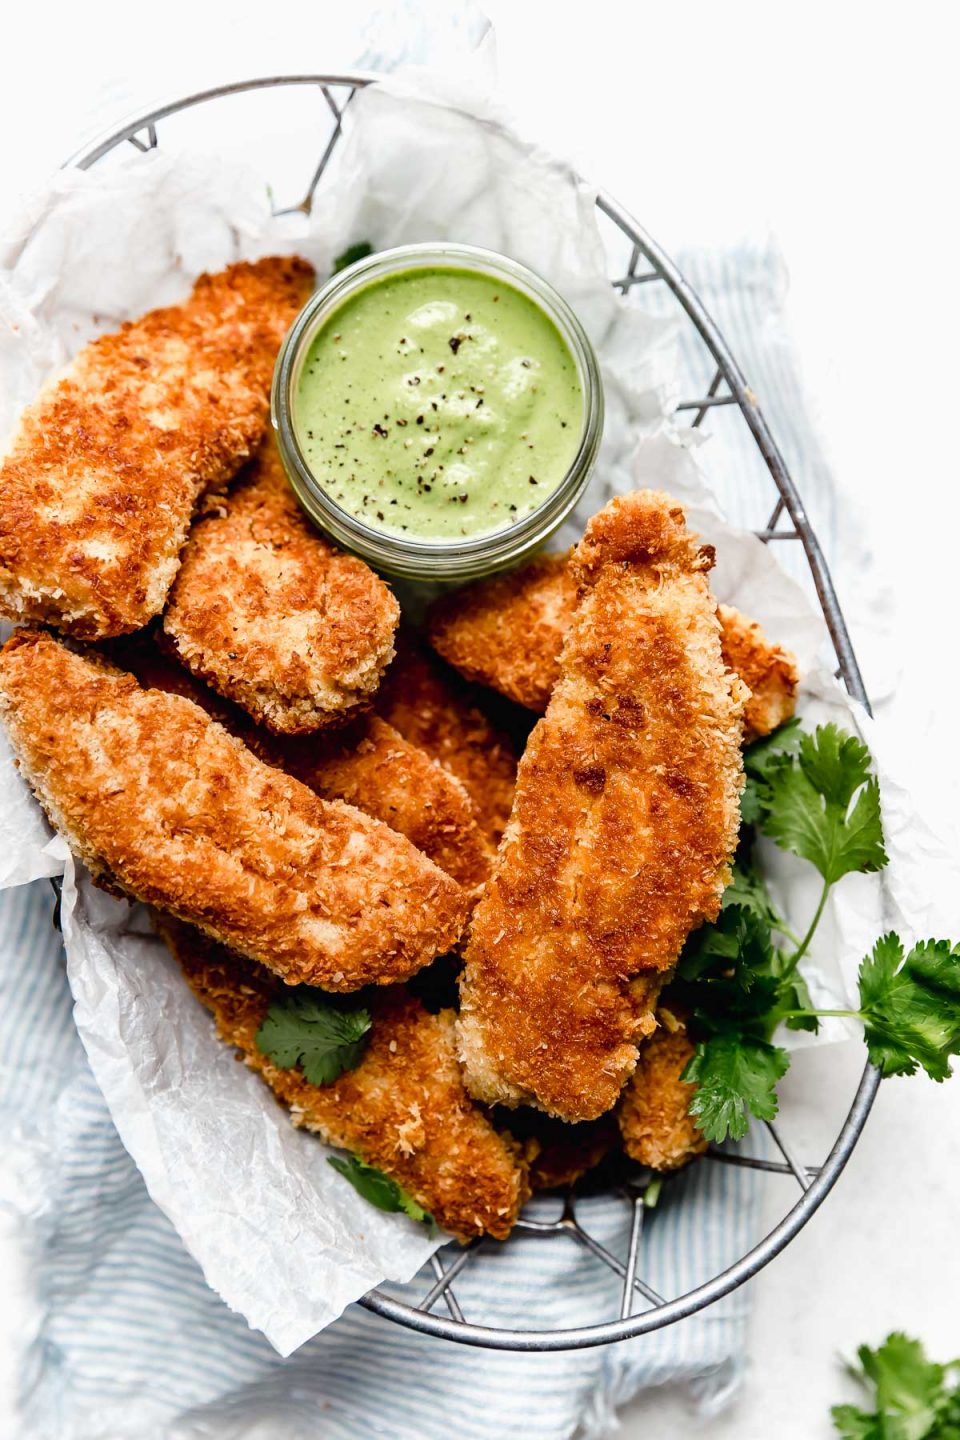 Golden brown coconut chicken tenders in a paper-lined wire basket with cilantro-lime cashew crema. The basket sits atop a blue & white striped linen.